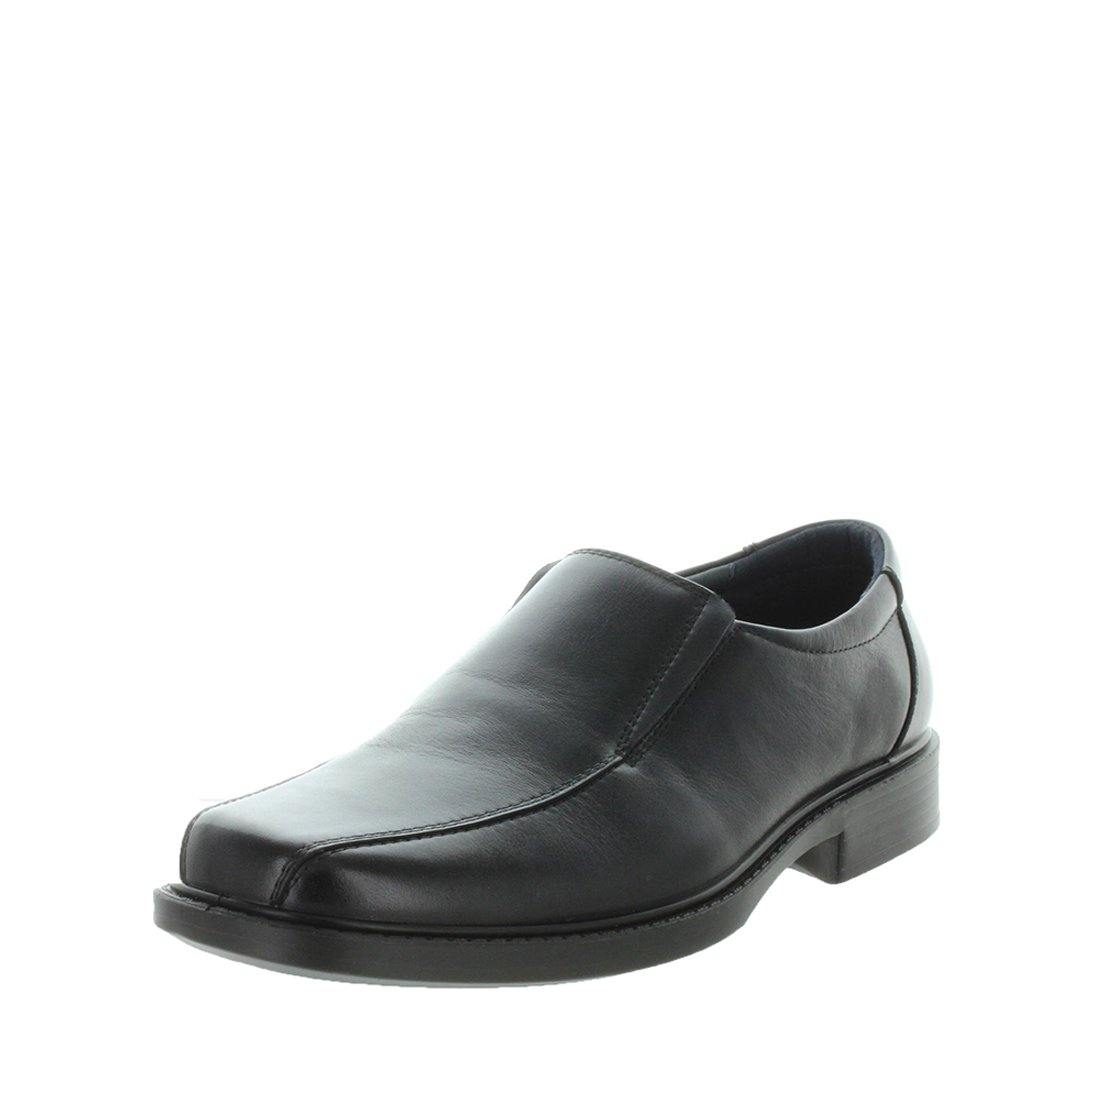 TRAYLE by CHURCHILL - iShoes - Men's Shoes, Men's Shoes: Dress, School Shoes, School Shoes: Senior, School Shoes: Senior Boy's - FOOTWEAR-FOOTWEAR